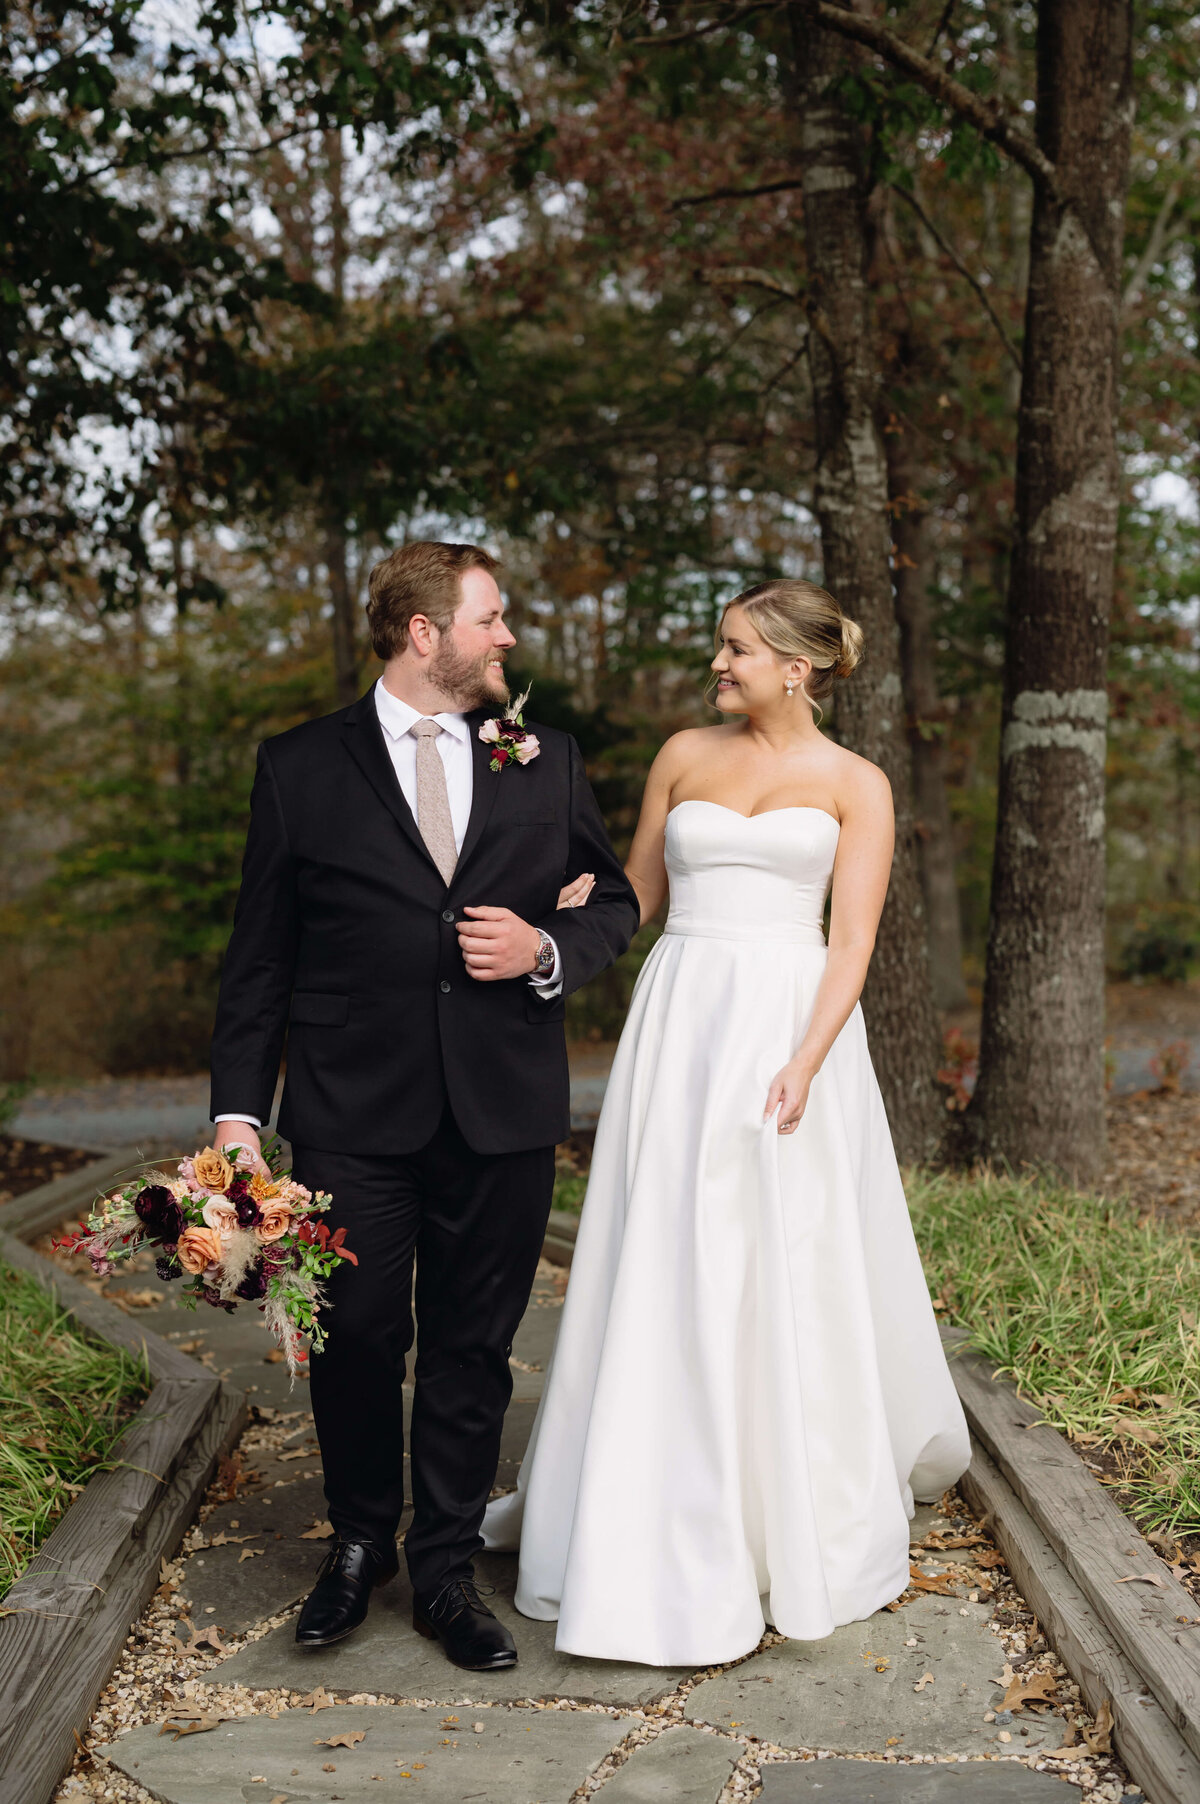 outdoor wedding picture with bride holding her grooms arm while they look at each other and smile while on a stone trail in the woods near Charlottesville wedding venues lawn